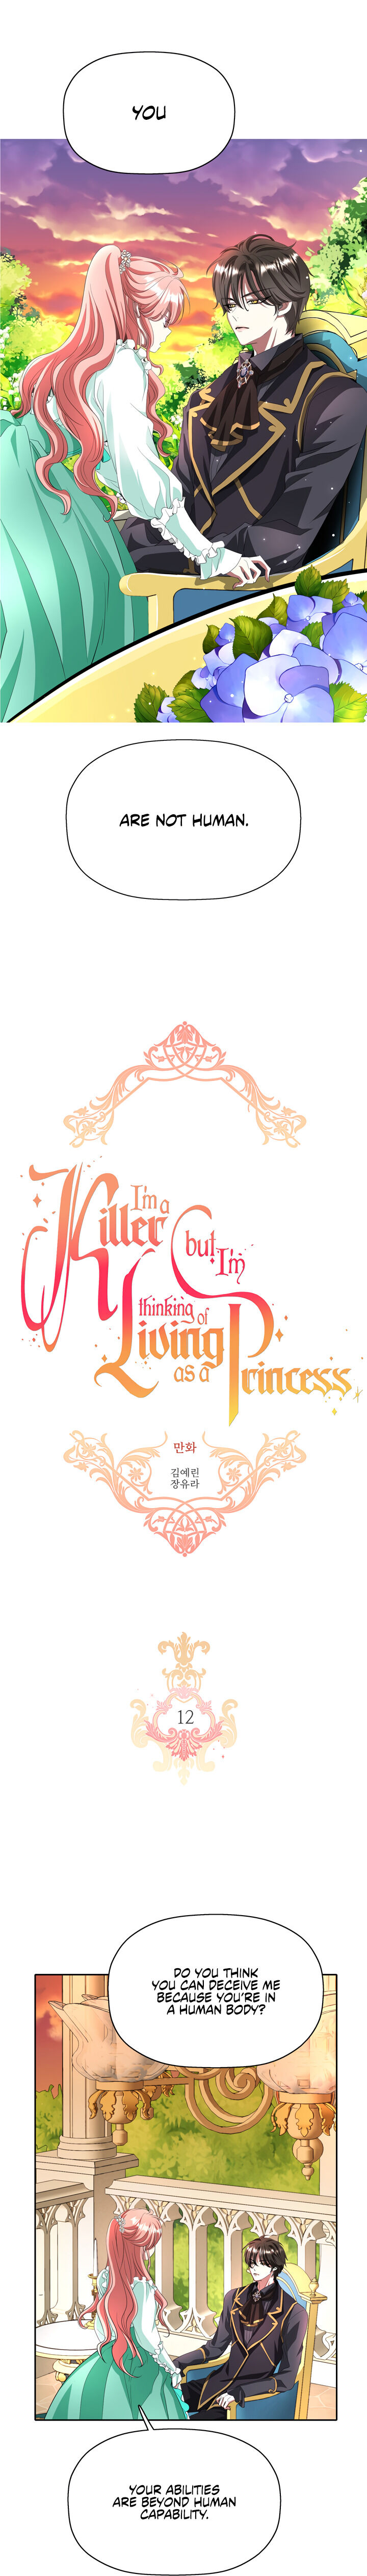 I’M A Killer But I’M Thinking Of Living As A Princess - Page 2